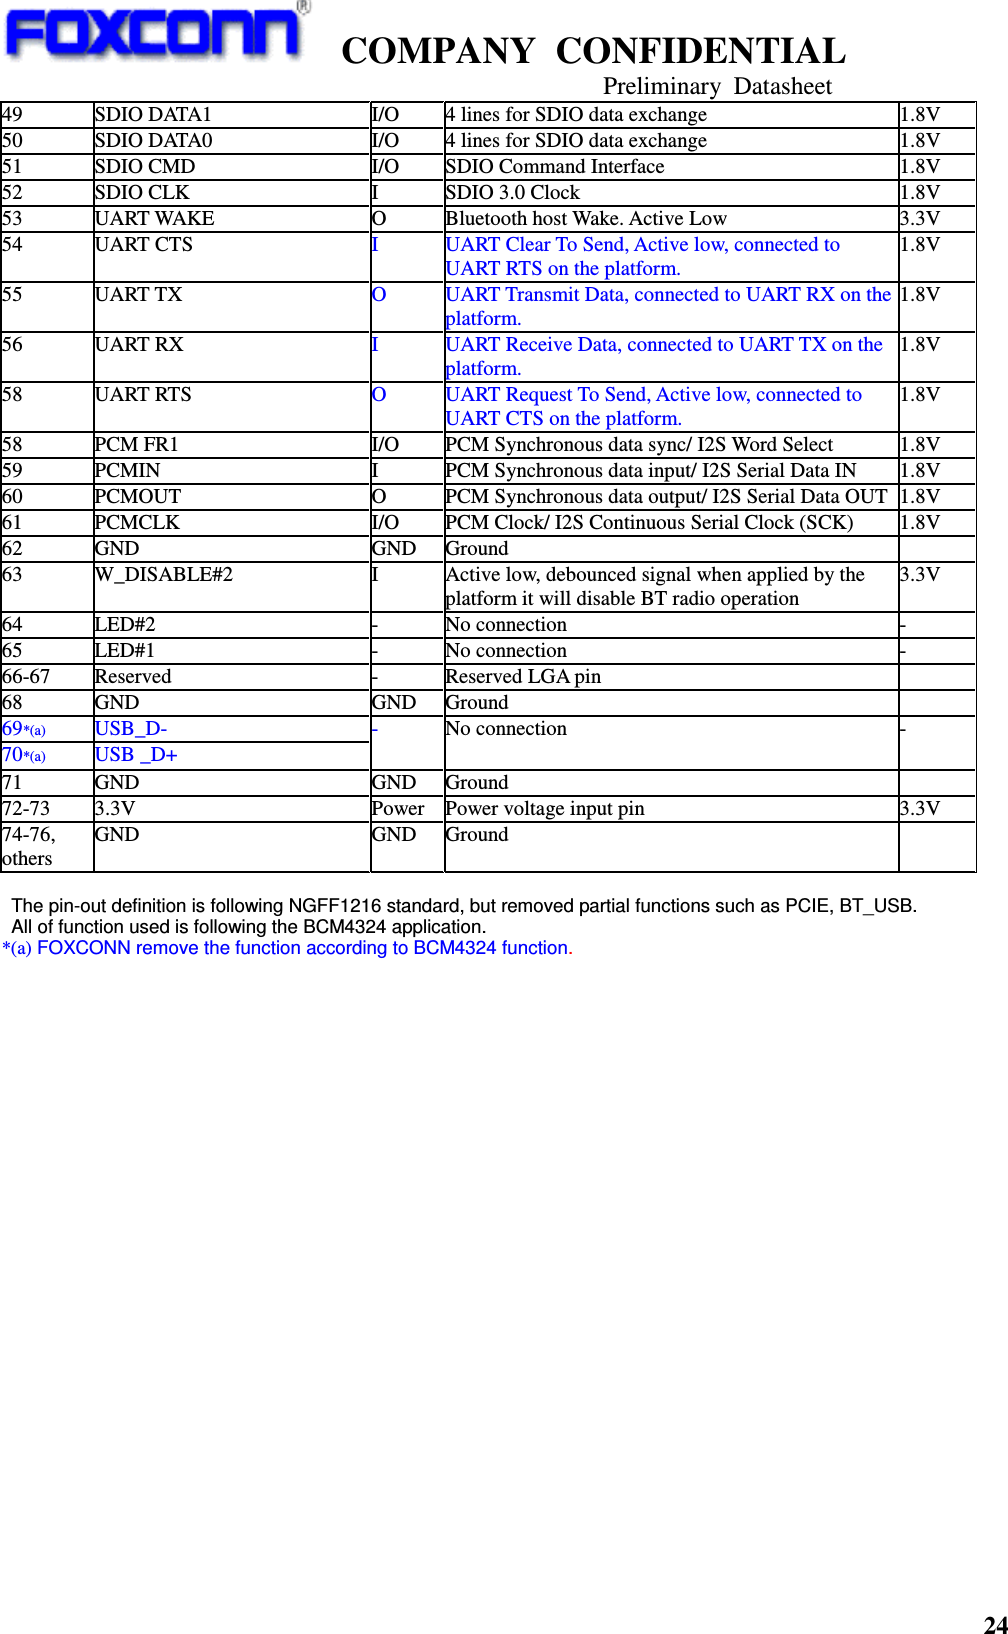    COMPANY  CONFIDENTIAL                                                                     Preliminary  Datasheet 24  49  SDIO DATA1  I/O  4 lines for SDIO data exchange    1.8V 50  SDIO DATA0  I/O  4 lines for SDIO data exchange    1.8V 51  SDIO CMD  I/O  SDIO Command Interface  1.8V 52  SDIO CLK  I  SDIO 3.0 Clock    1.8V 53  UART WAKE  O  Bluetooth host Wake. Active Low    3.3V 54  UART CTS  I  UART Clear To Send, Active low, connected to UART RTS on the platform. 1.8V 55  UART TX  O  UART Transmit Data, connected to UART RX on the platform. 1.8V 56  UART RX  I  UART Receive Data, connected to UART TX on the platform. 1.8V 58  UART RTS  O  UART Request To Send, Active low, connected to UART CTS on the platform. 1.8V 58  PCM FR1  I/O  PCM Synchronous data sync/ I2S Word Select    1.8V 59  PCMIN  I  PCM Synchronous data input/ I2S Serial Data IN  1.8V 60  PCMOUT  O  PCM Synchronous data output/ I2S Serial Data OUT 1.8V 61  PCMCLK  I/O  PCM Clock/ I2S Continuous Serial Clock (SCK)    1.8V 62  GND  GND  Ground   63  W_DISABLE#2  I  Active low, debounced signal when applied by the platform it will disable BT radio operation   3.3V 64  LED#2  -  No connection - 65  LED#1  -  No connection - 66-67  Reserved  -  Reserved LGA pin   68  GND  GND  Ground   69*(a)  USB_D- 70*(a)  USB _D+ -  No connection - 71  GND  GND  Ground   72-73  3.3V  Power  Power voltage input pin  3.3V 74-76, others GND  GND  Ground    The pin-out definition is following NGFF1216 standard, but removed partial functions such as PCIE, BT_USB. All of function used is following the BCM4324 application. *(a) FOXCONN remove the function according to BCM4324 function.    